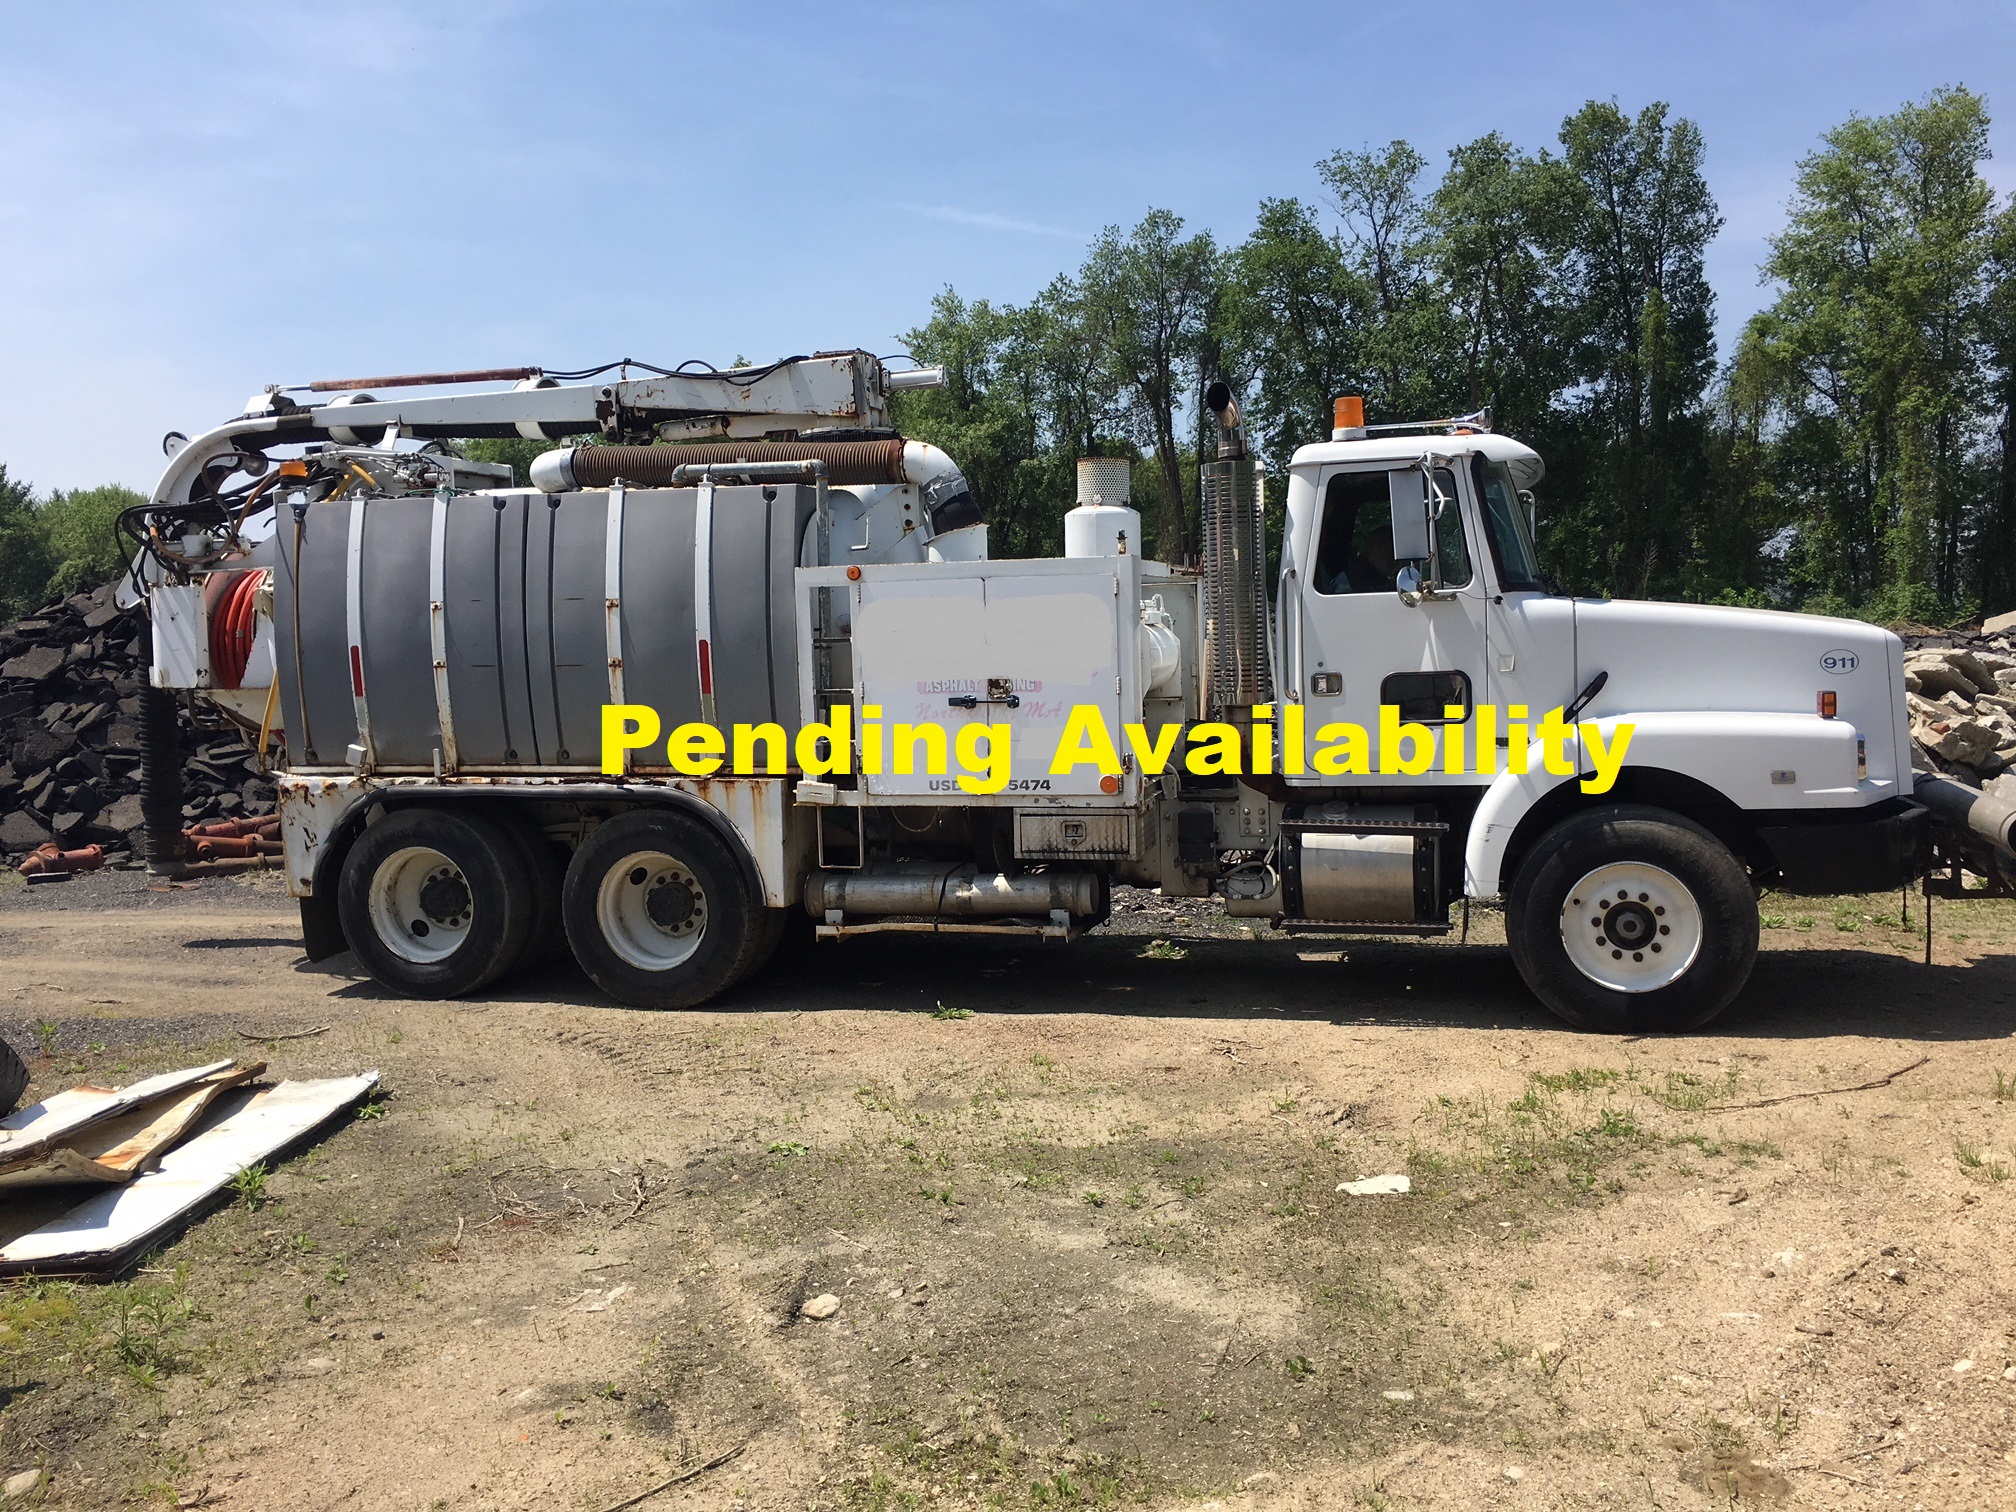 Vacuum Truck 1992 Volvo White. VE12 360 CE engine. 465 hp, only 33'383 miles! Low geared 6 speed transmission, 20'000 front axle, 46'000 rear axle, full lockers, solid double frame chassis, 1000 gallon Aquatech F-10 tank with a Roots 624 blower. The vacuum has 881 hours and the water pump has 1118 metered hours with approximately 250 hours on a rebuilt pump. corded remote. This truck starts right up in the coldest days and runs great. This truck would be a great truck to make into a plow or dump truck if not continued it's use as a vacuum truck. Available for a short time only! Priced @ $17'000 or first best reasonable offer. Item location - Northfield, MA. Call for more information.